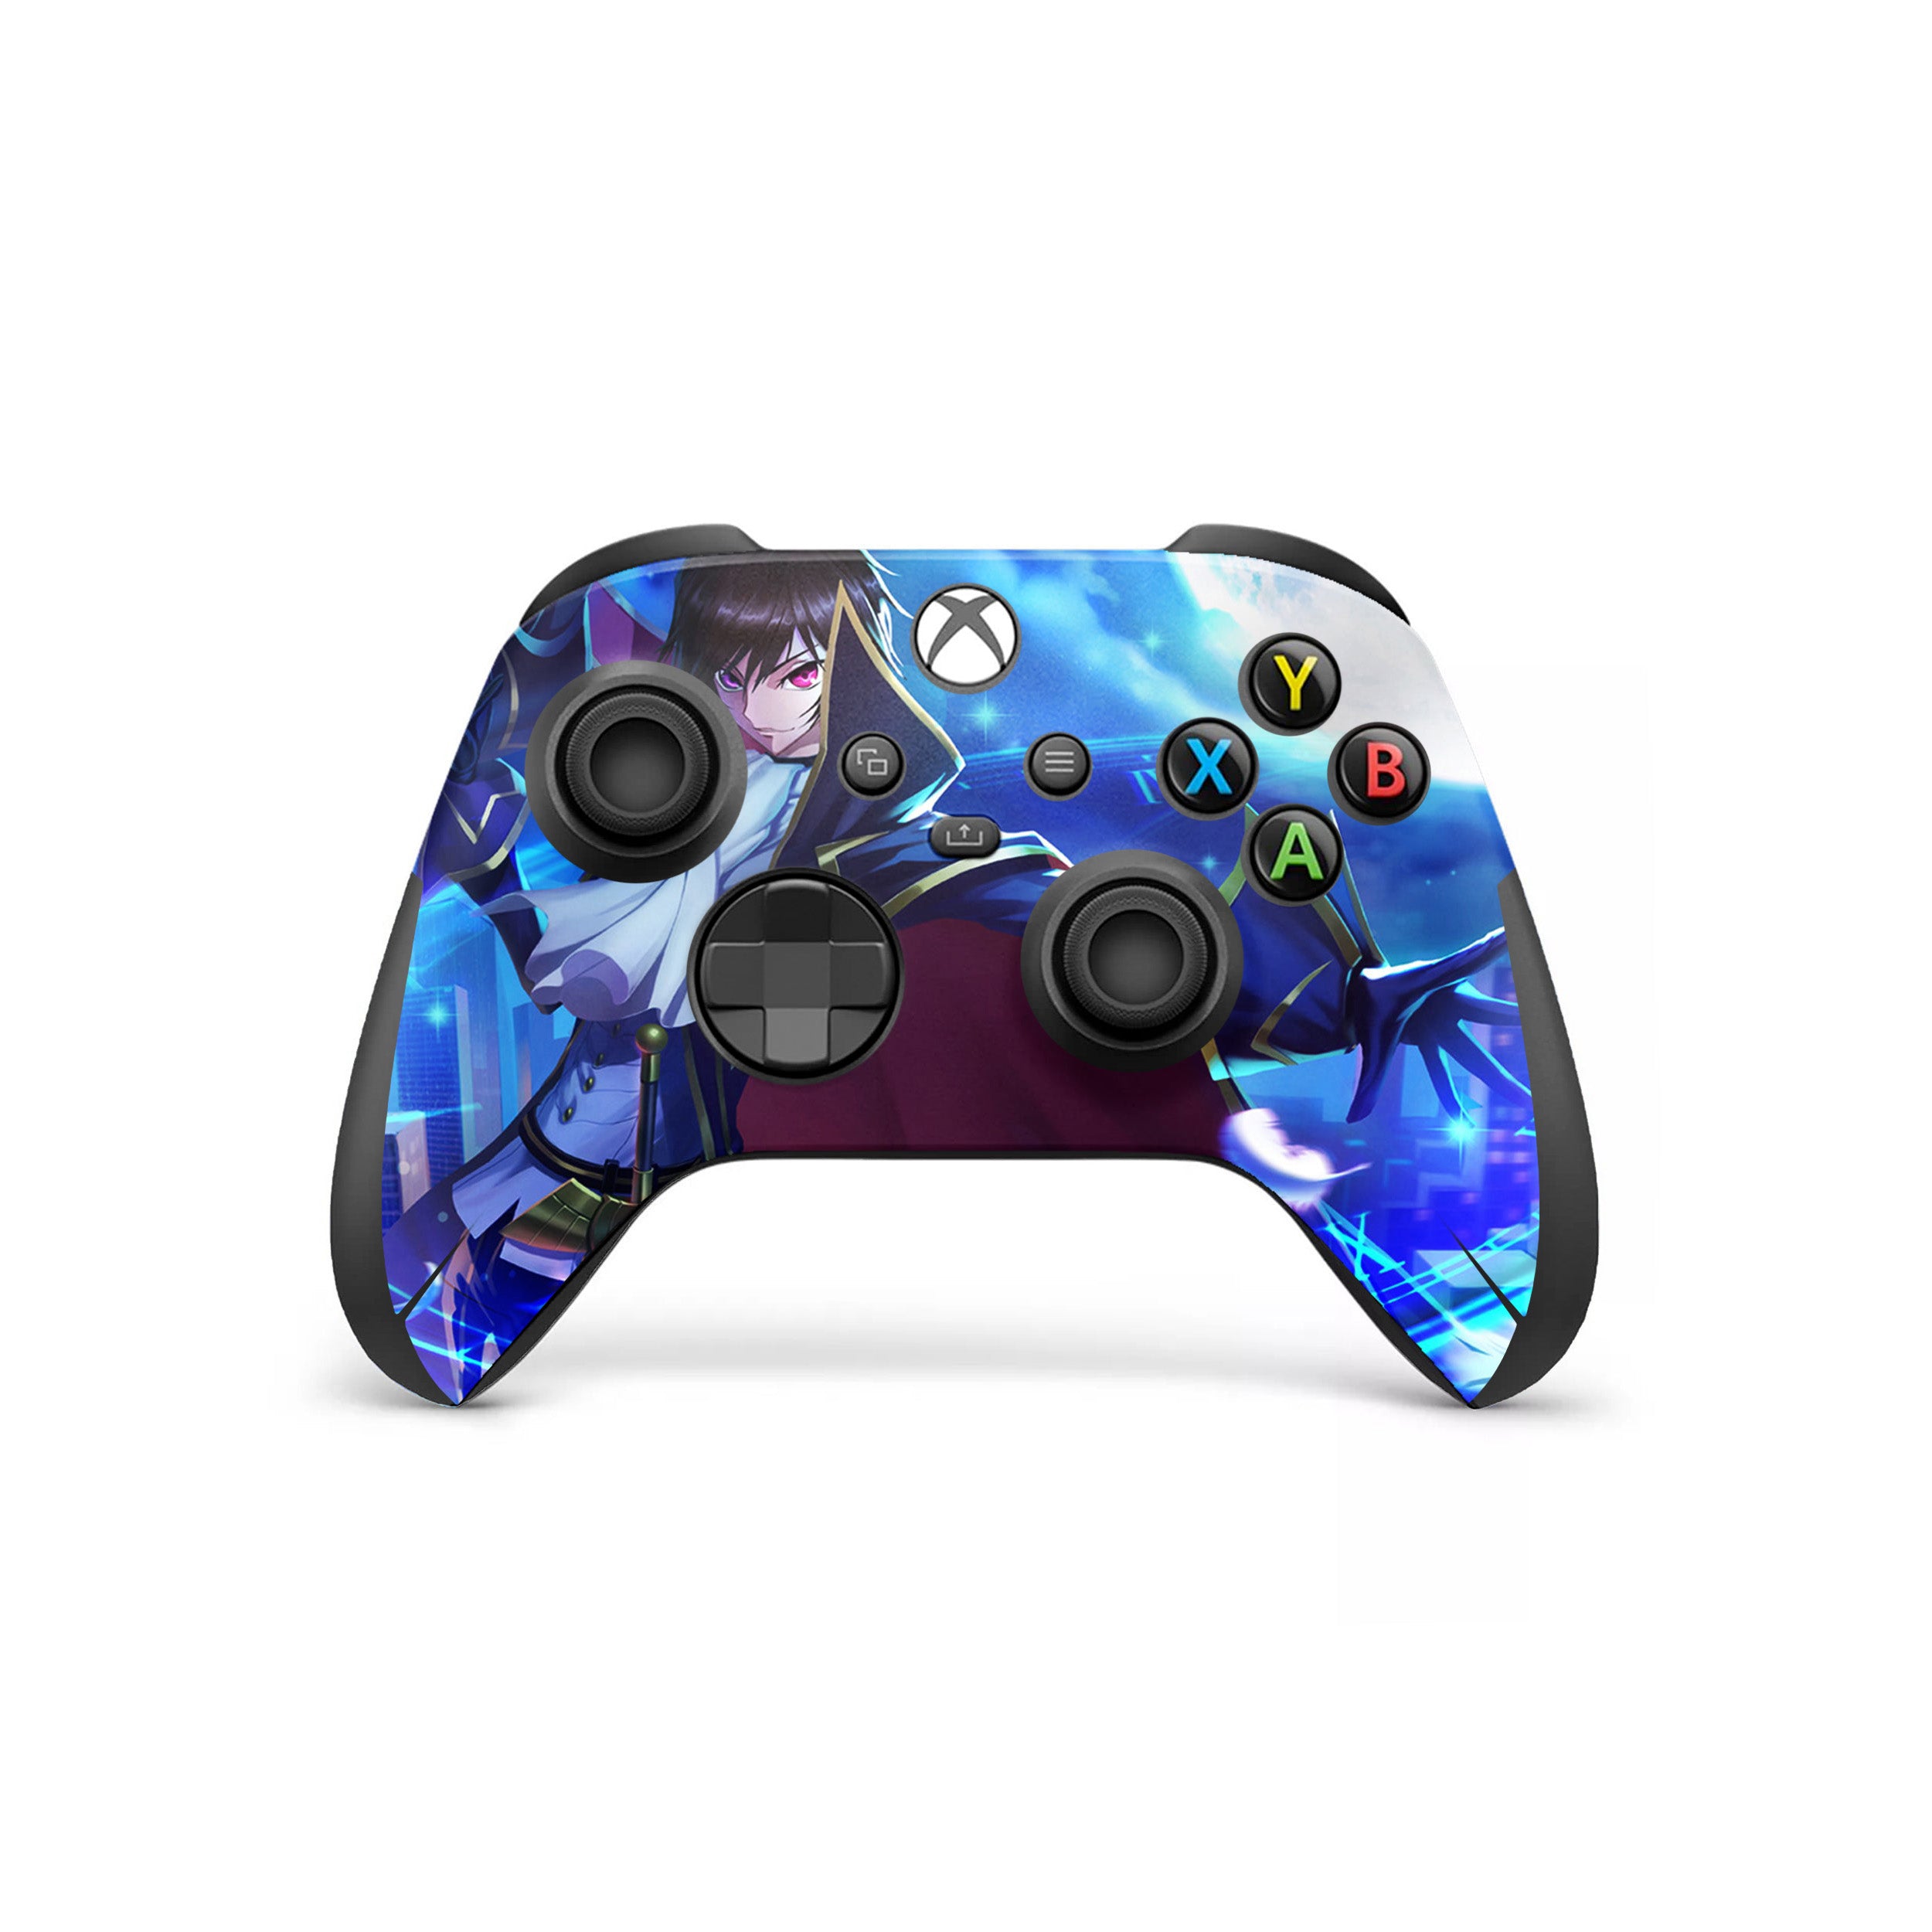 A video game skin featuring a Code Geass Lelouch Lamperoug design for the Xbox Wireless Controller.